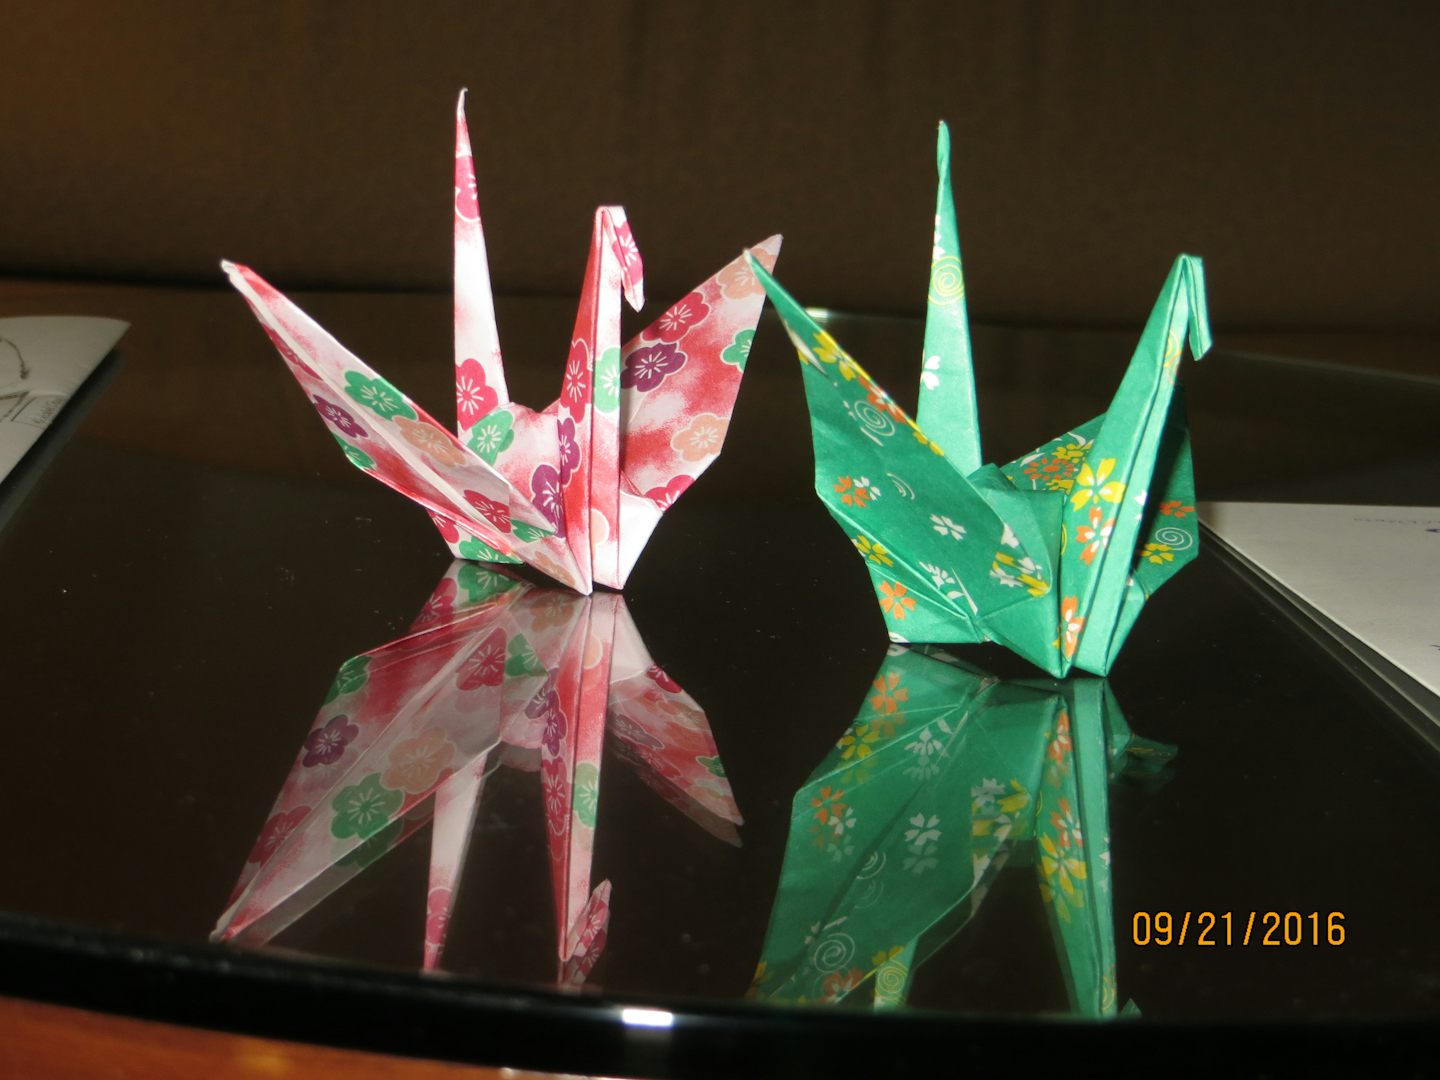 The Japanese present everything in a beautiful manner. Here, we were welcomed to a hotel with the lovely origami cranes.